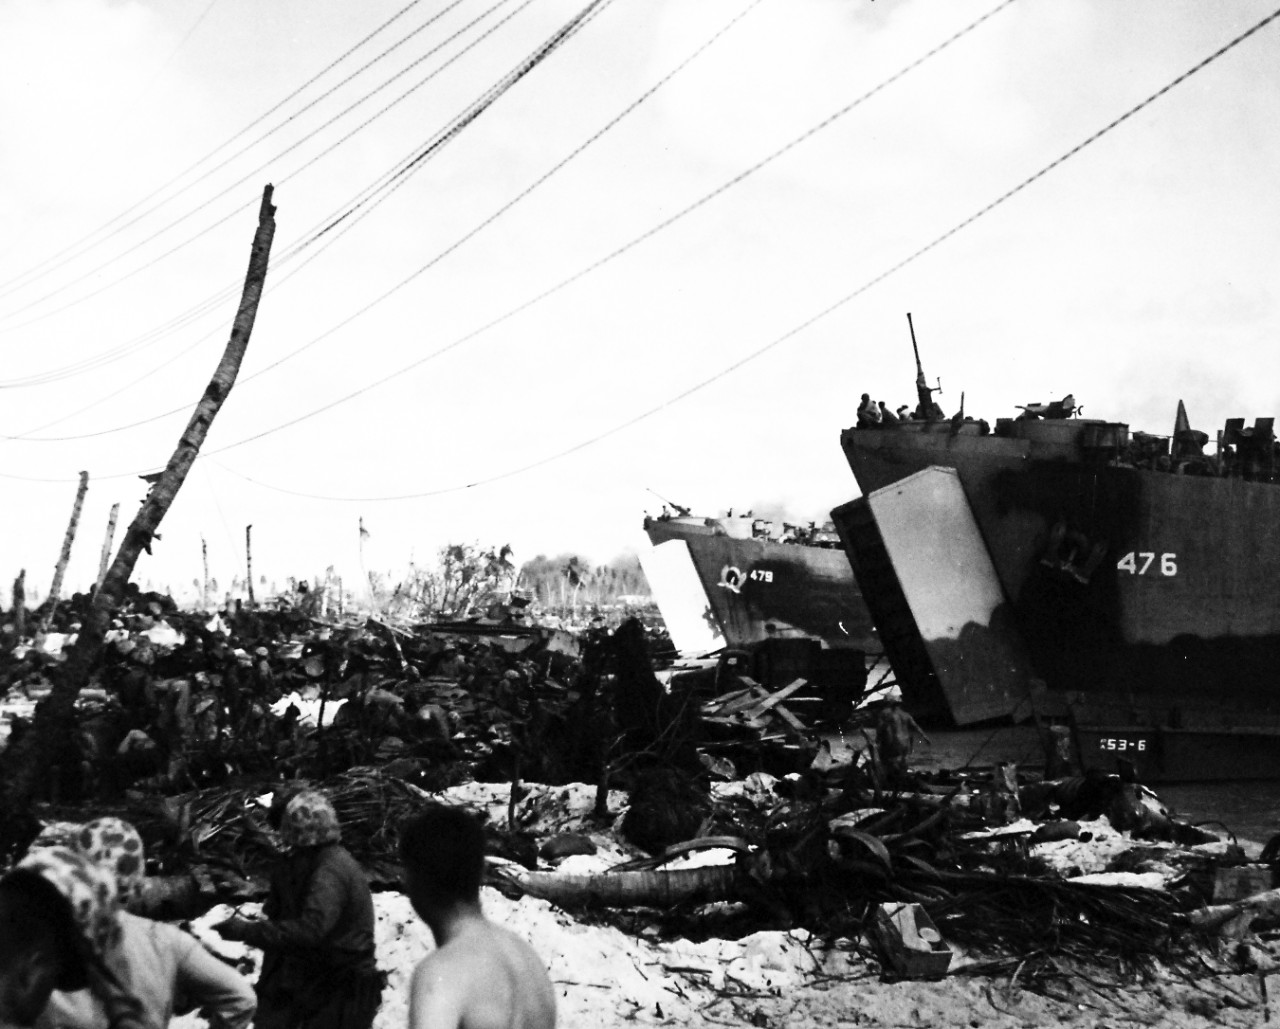 80-G-54417: Operation Flintlock, January-February 1944.    USS LST 476 and USS LST 479 emit a stream of mean and material at Roi Island in the Marshall Islands.  The island is a mass of wreckage from the terrific bombardment loosed by the U.S. Navy as a prelude to the landing.   Photograph released March 7, 1944.  Official U.S. Navy photograph, now in the collections of the National Archives.  (2016/06/28).